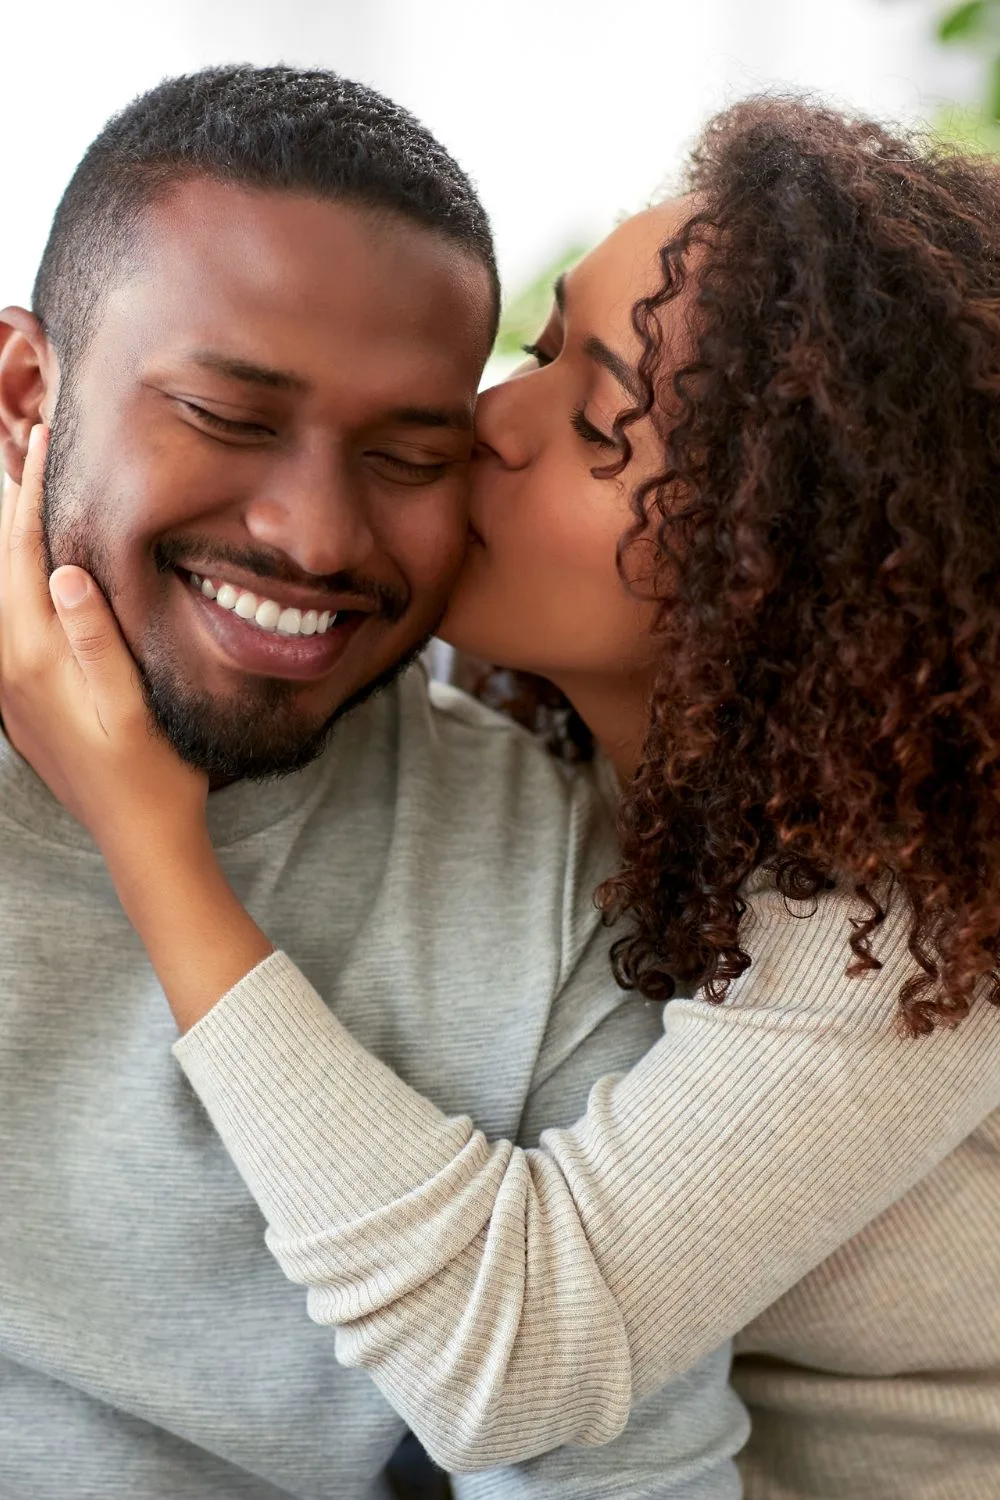 How to make your husband crazy about you even after years of marriage